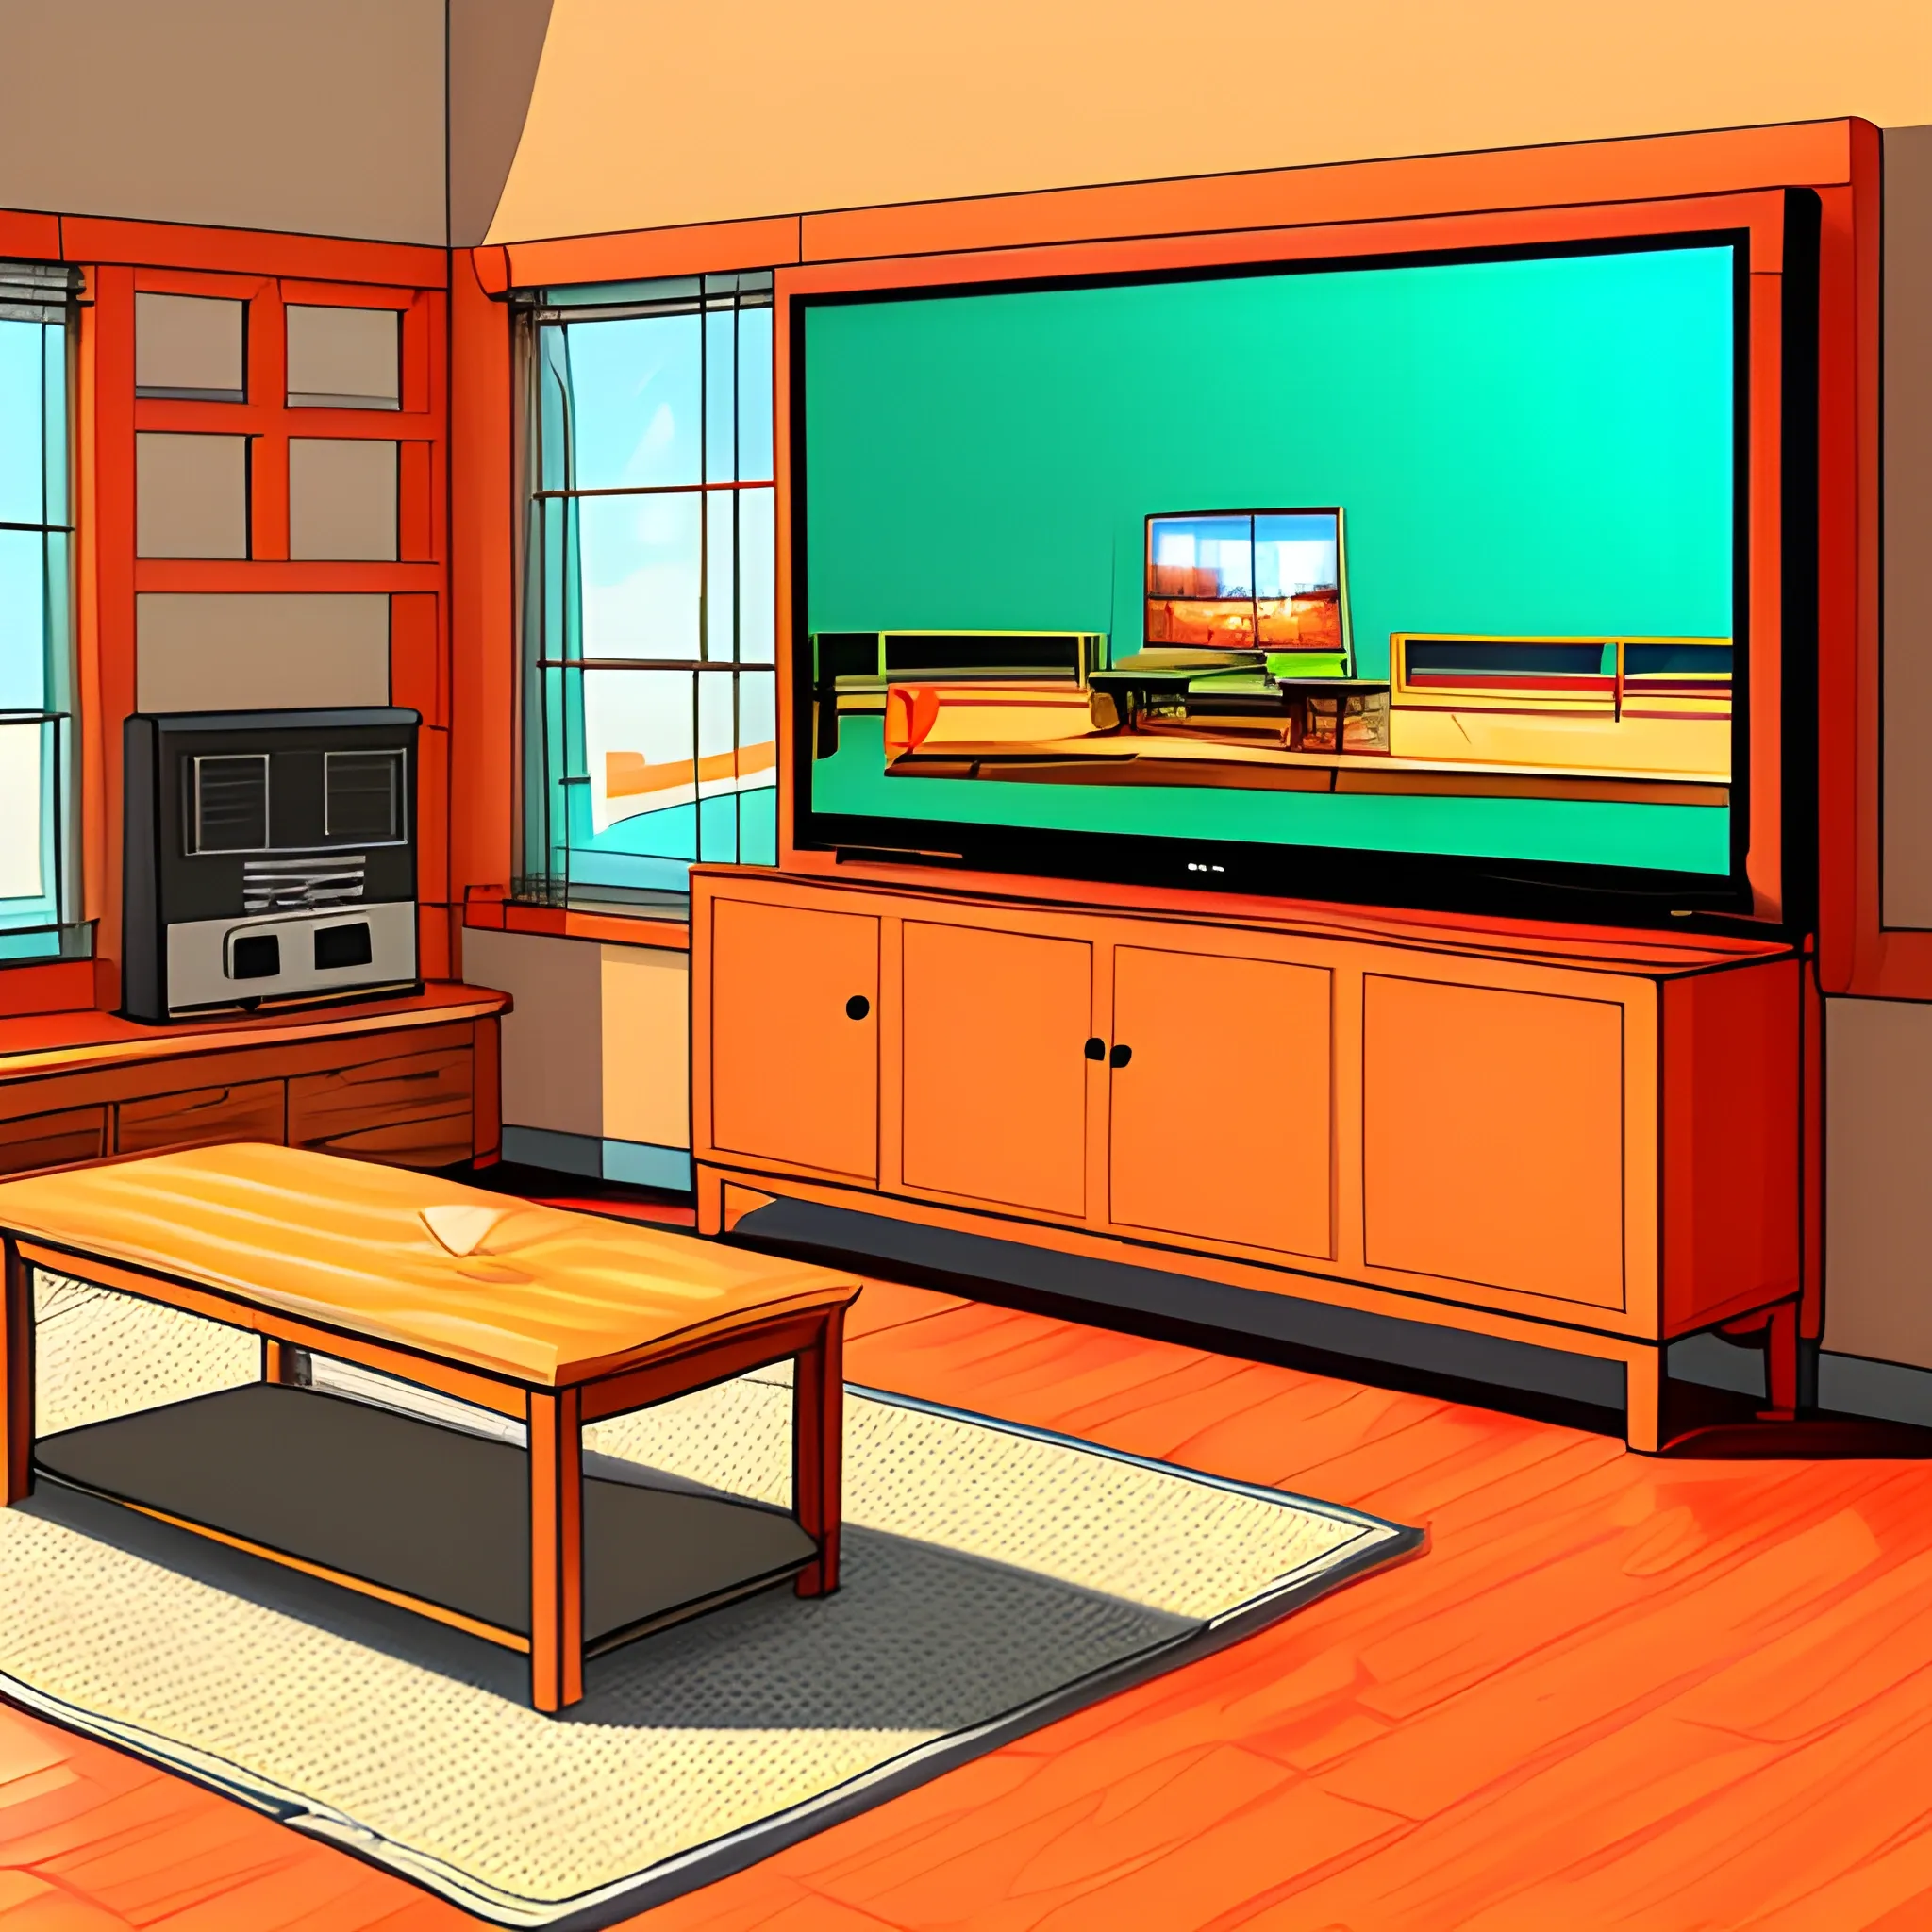 living room with wooden table and benches with a television on the front wall, with frontal viewing angles, with digital drawing style in warm colors.